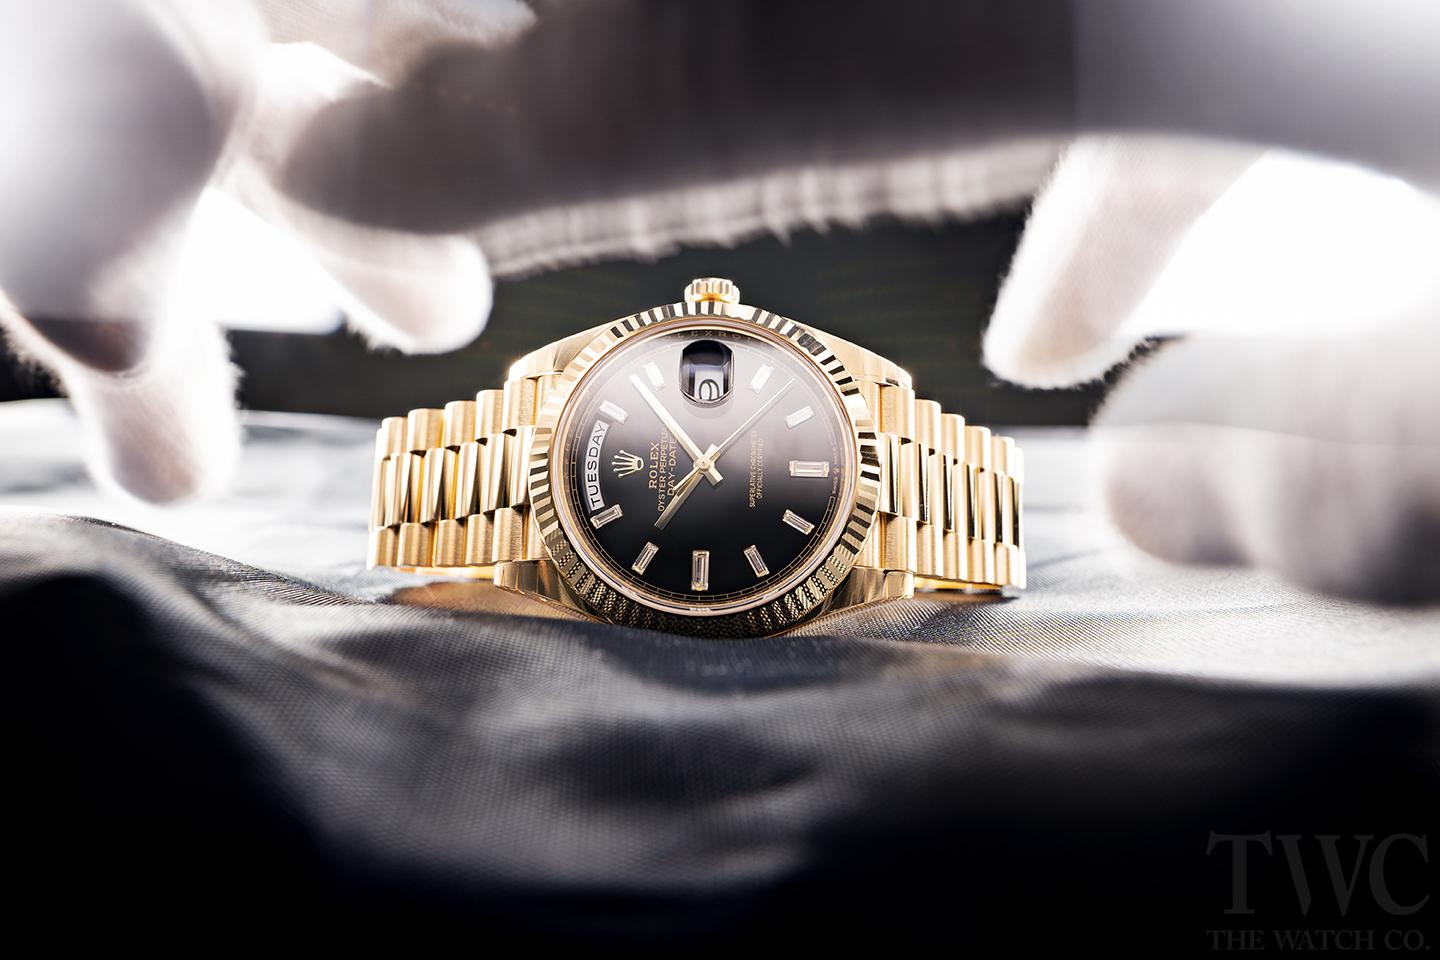 Purchasing Rolex Watches from Dealers